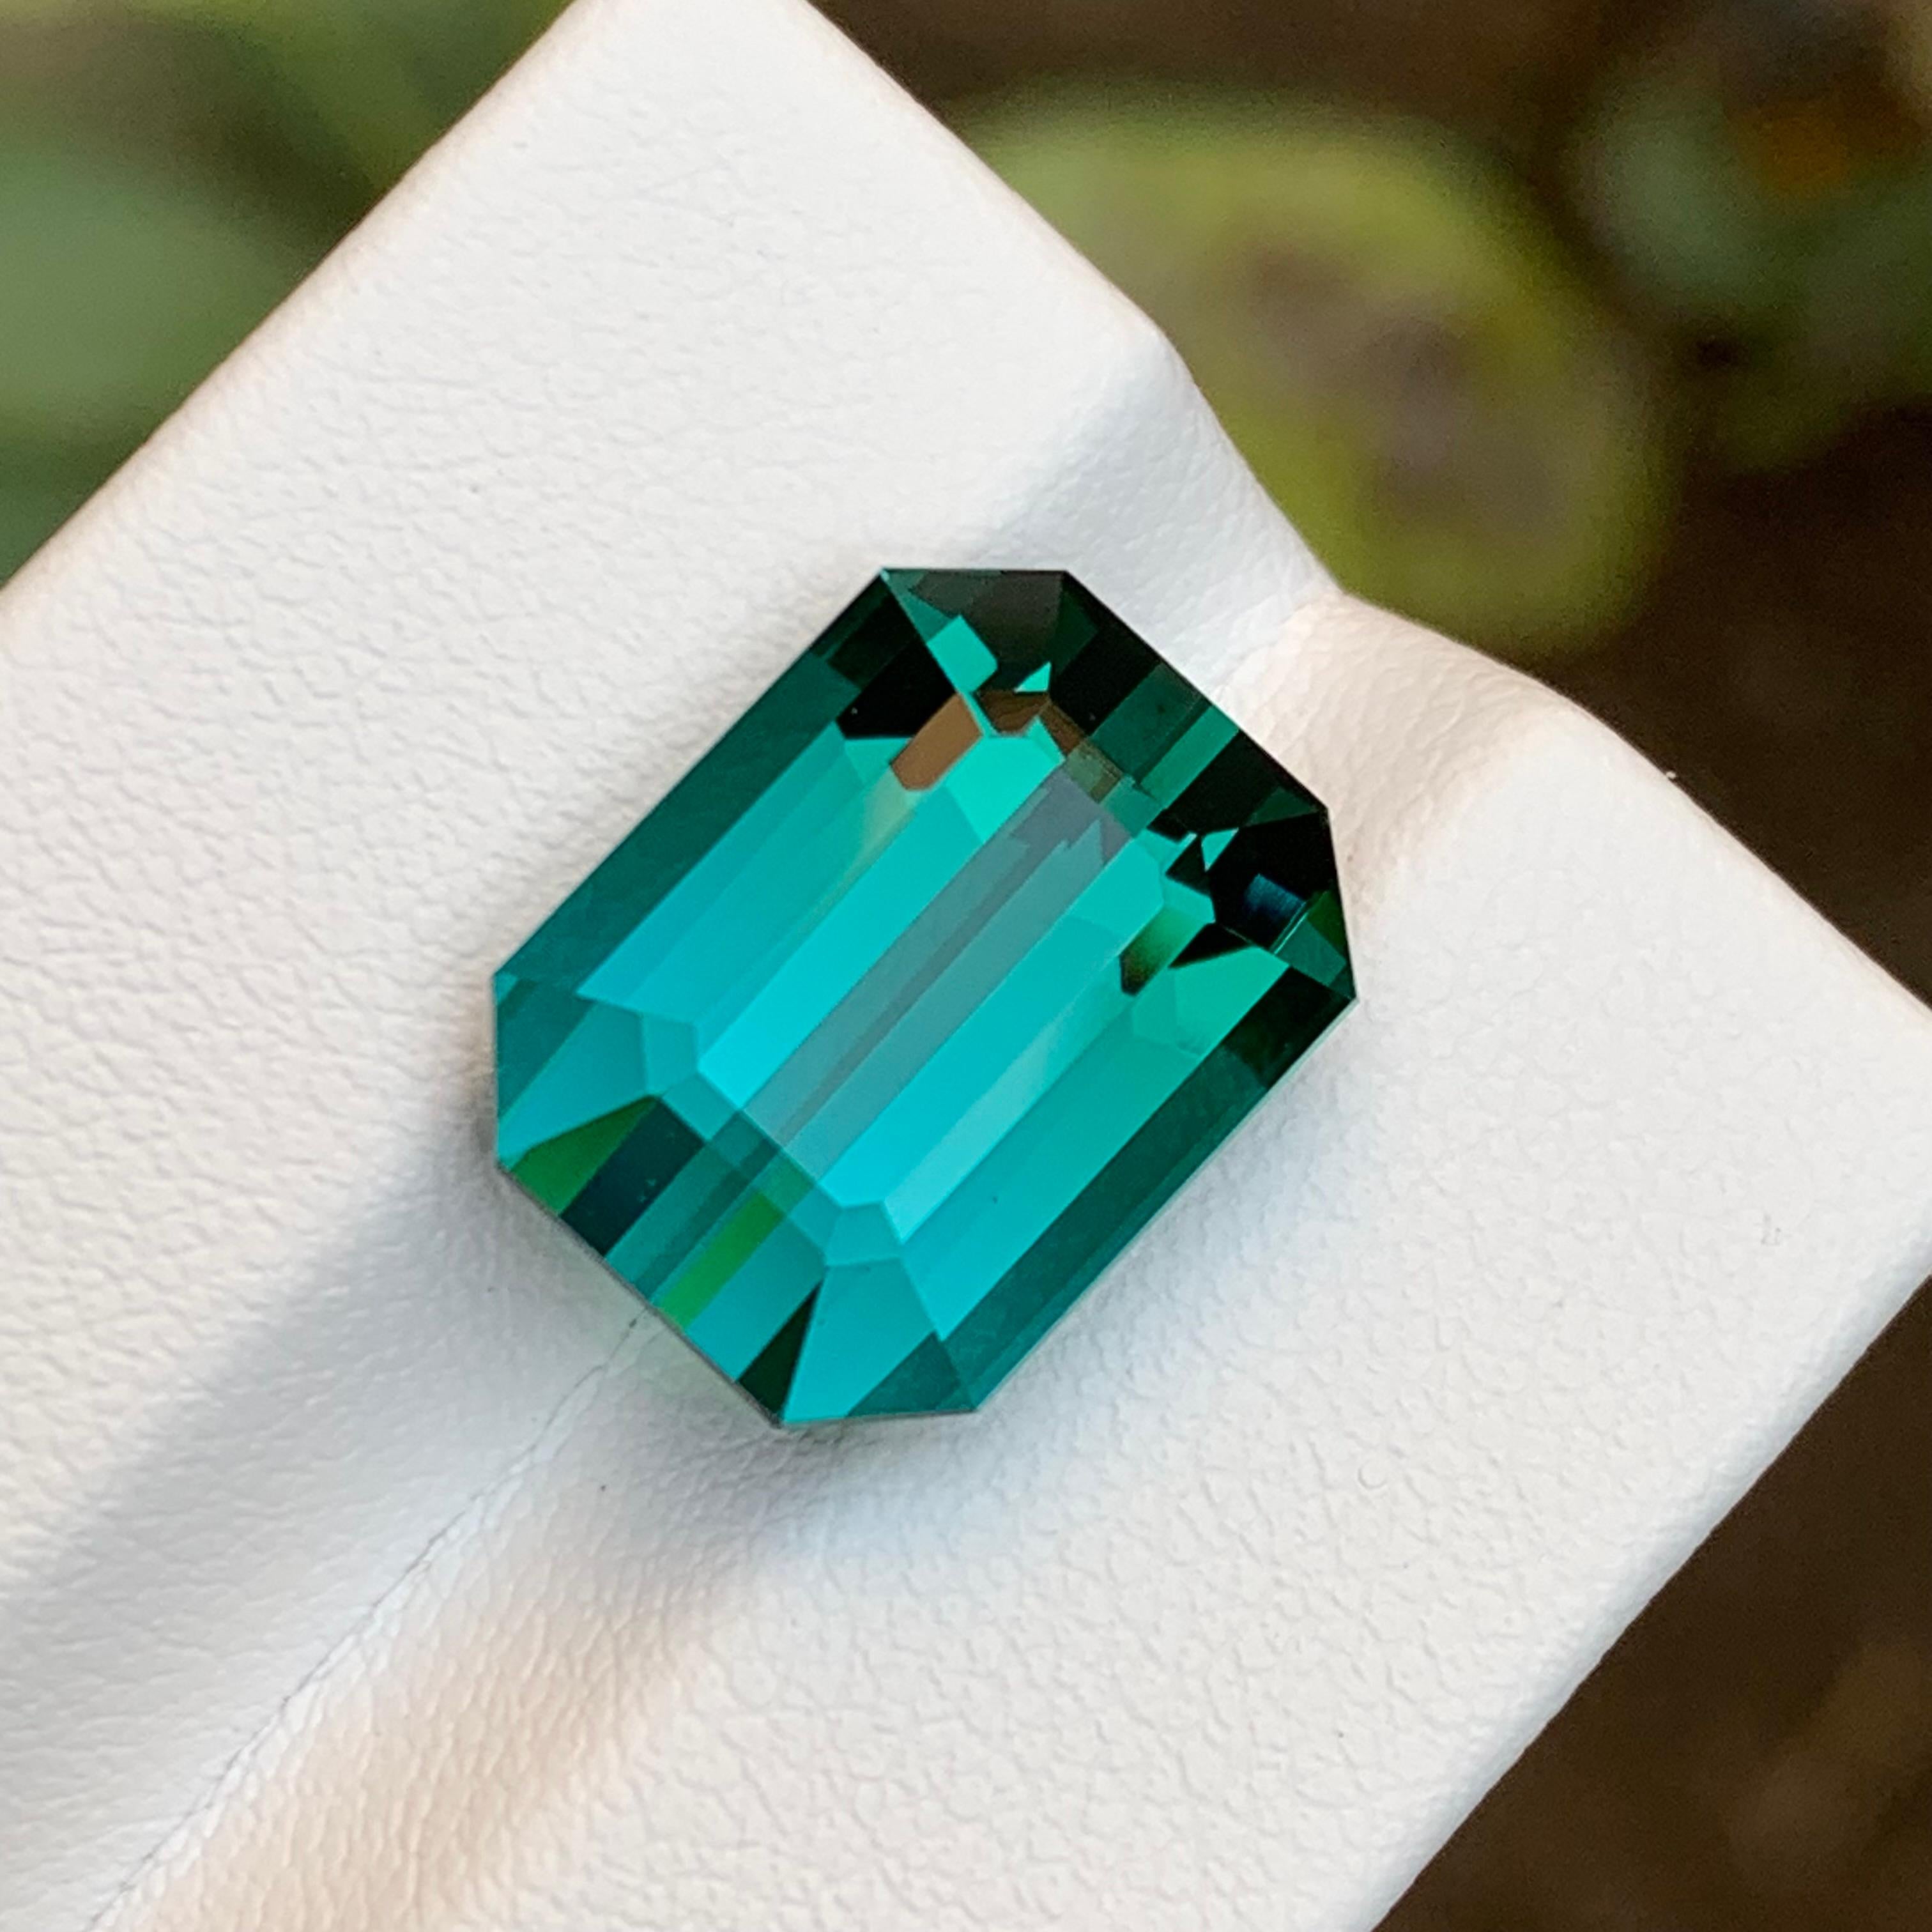 GEMSTONE TYPE: Tourmaline
PIECE(S): 1
WEIGHT: 13.05 Carat
SHAPE: Emerald 
SIZE (MM):  14.43 x 11.17 x 8.97
COLOR: Greenish Blue
CLARITY: Loupe Clean
TREATMENT: Not treated
ORIGIN: Afghanistan
CERTIFICATE: On demand 

Behold a breathtaking rarity: a